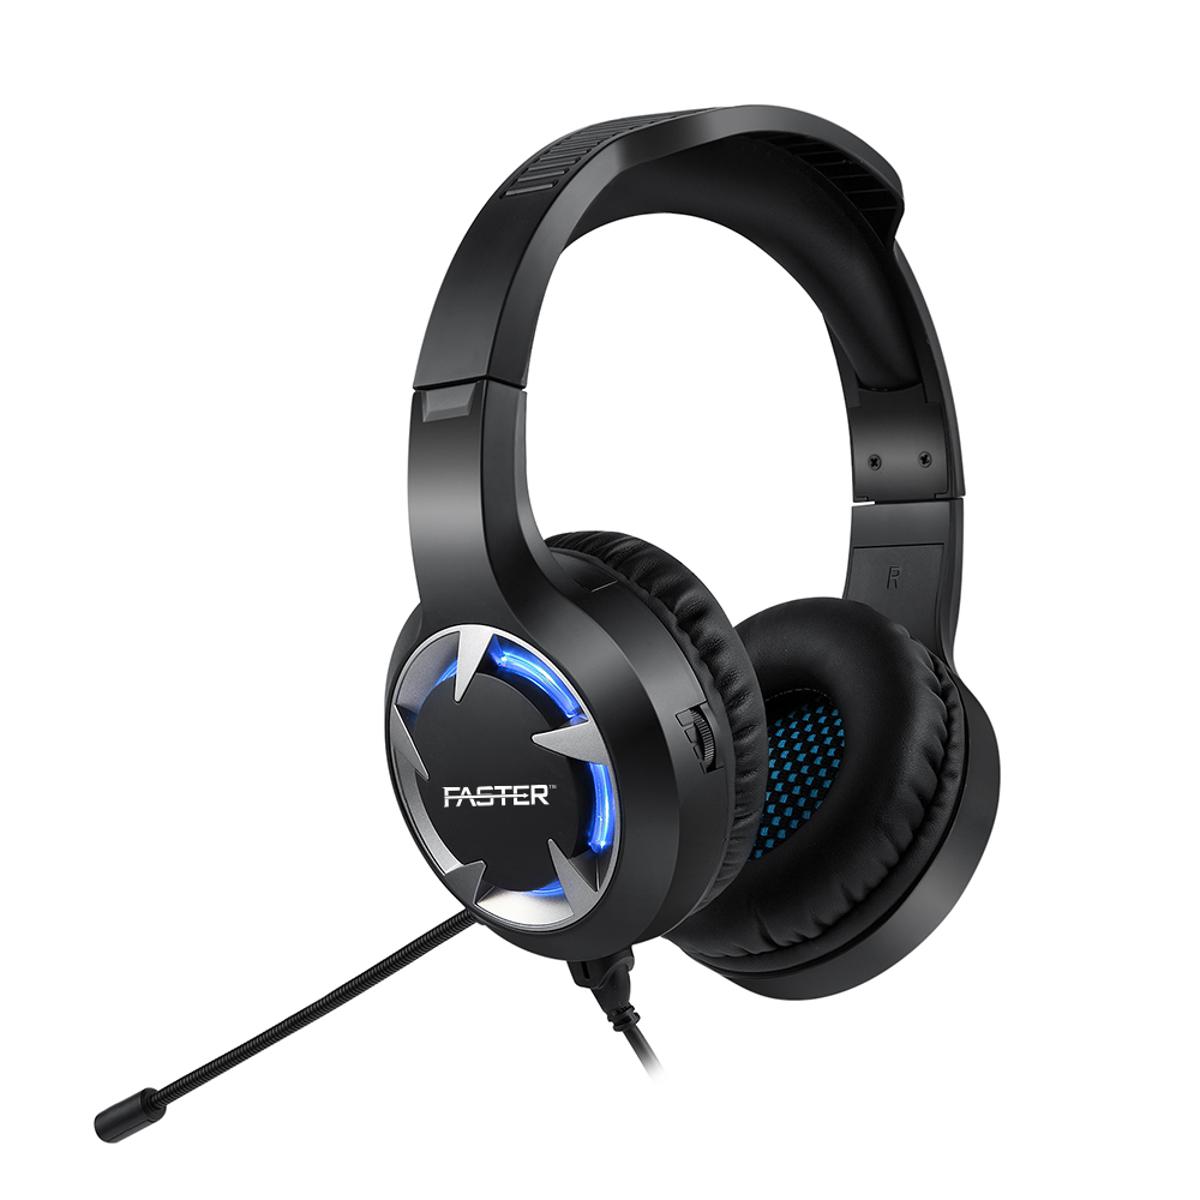 FASTER Blubolt BG-100 Surrounding Sound Gaming Headset with Noise Cancelling Microphone for PC and Mobile